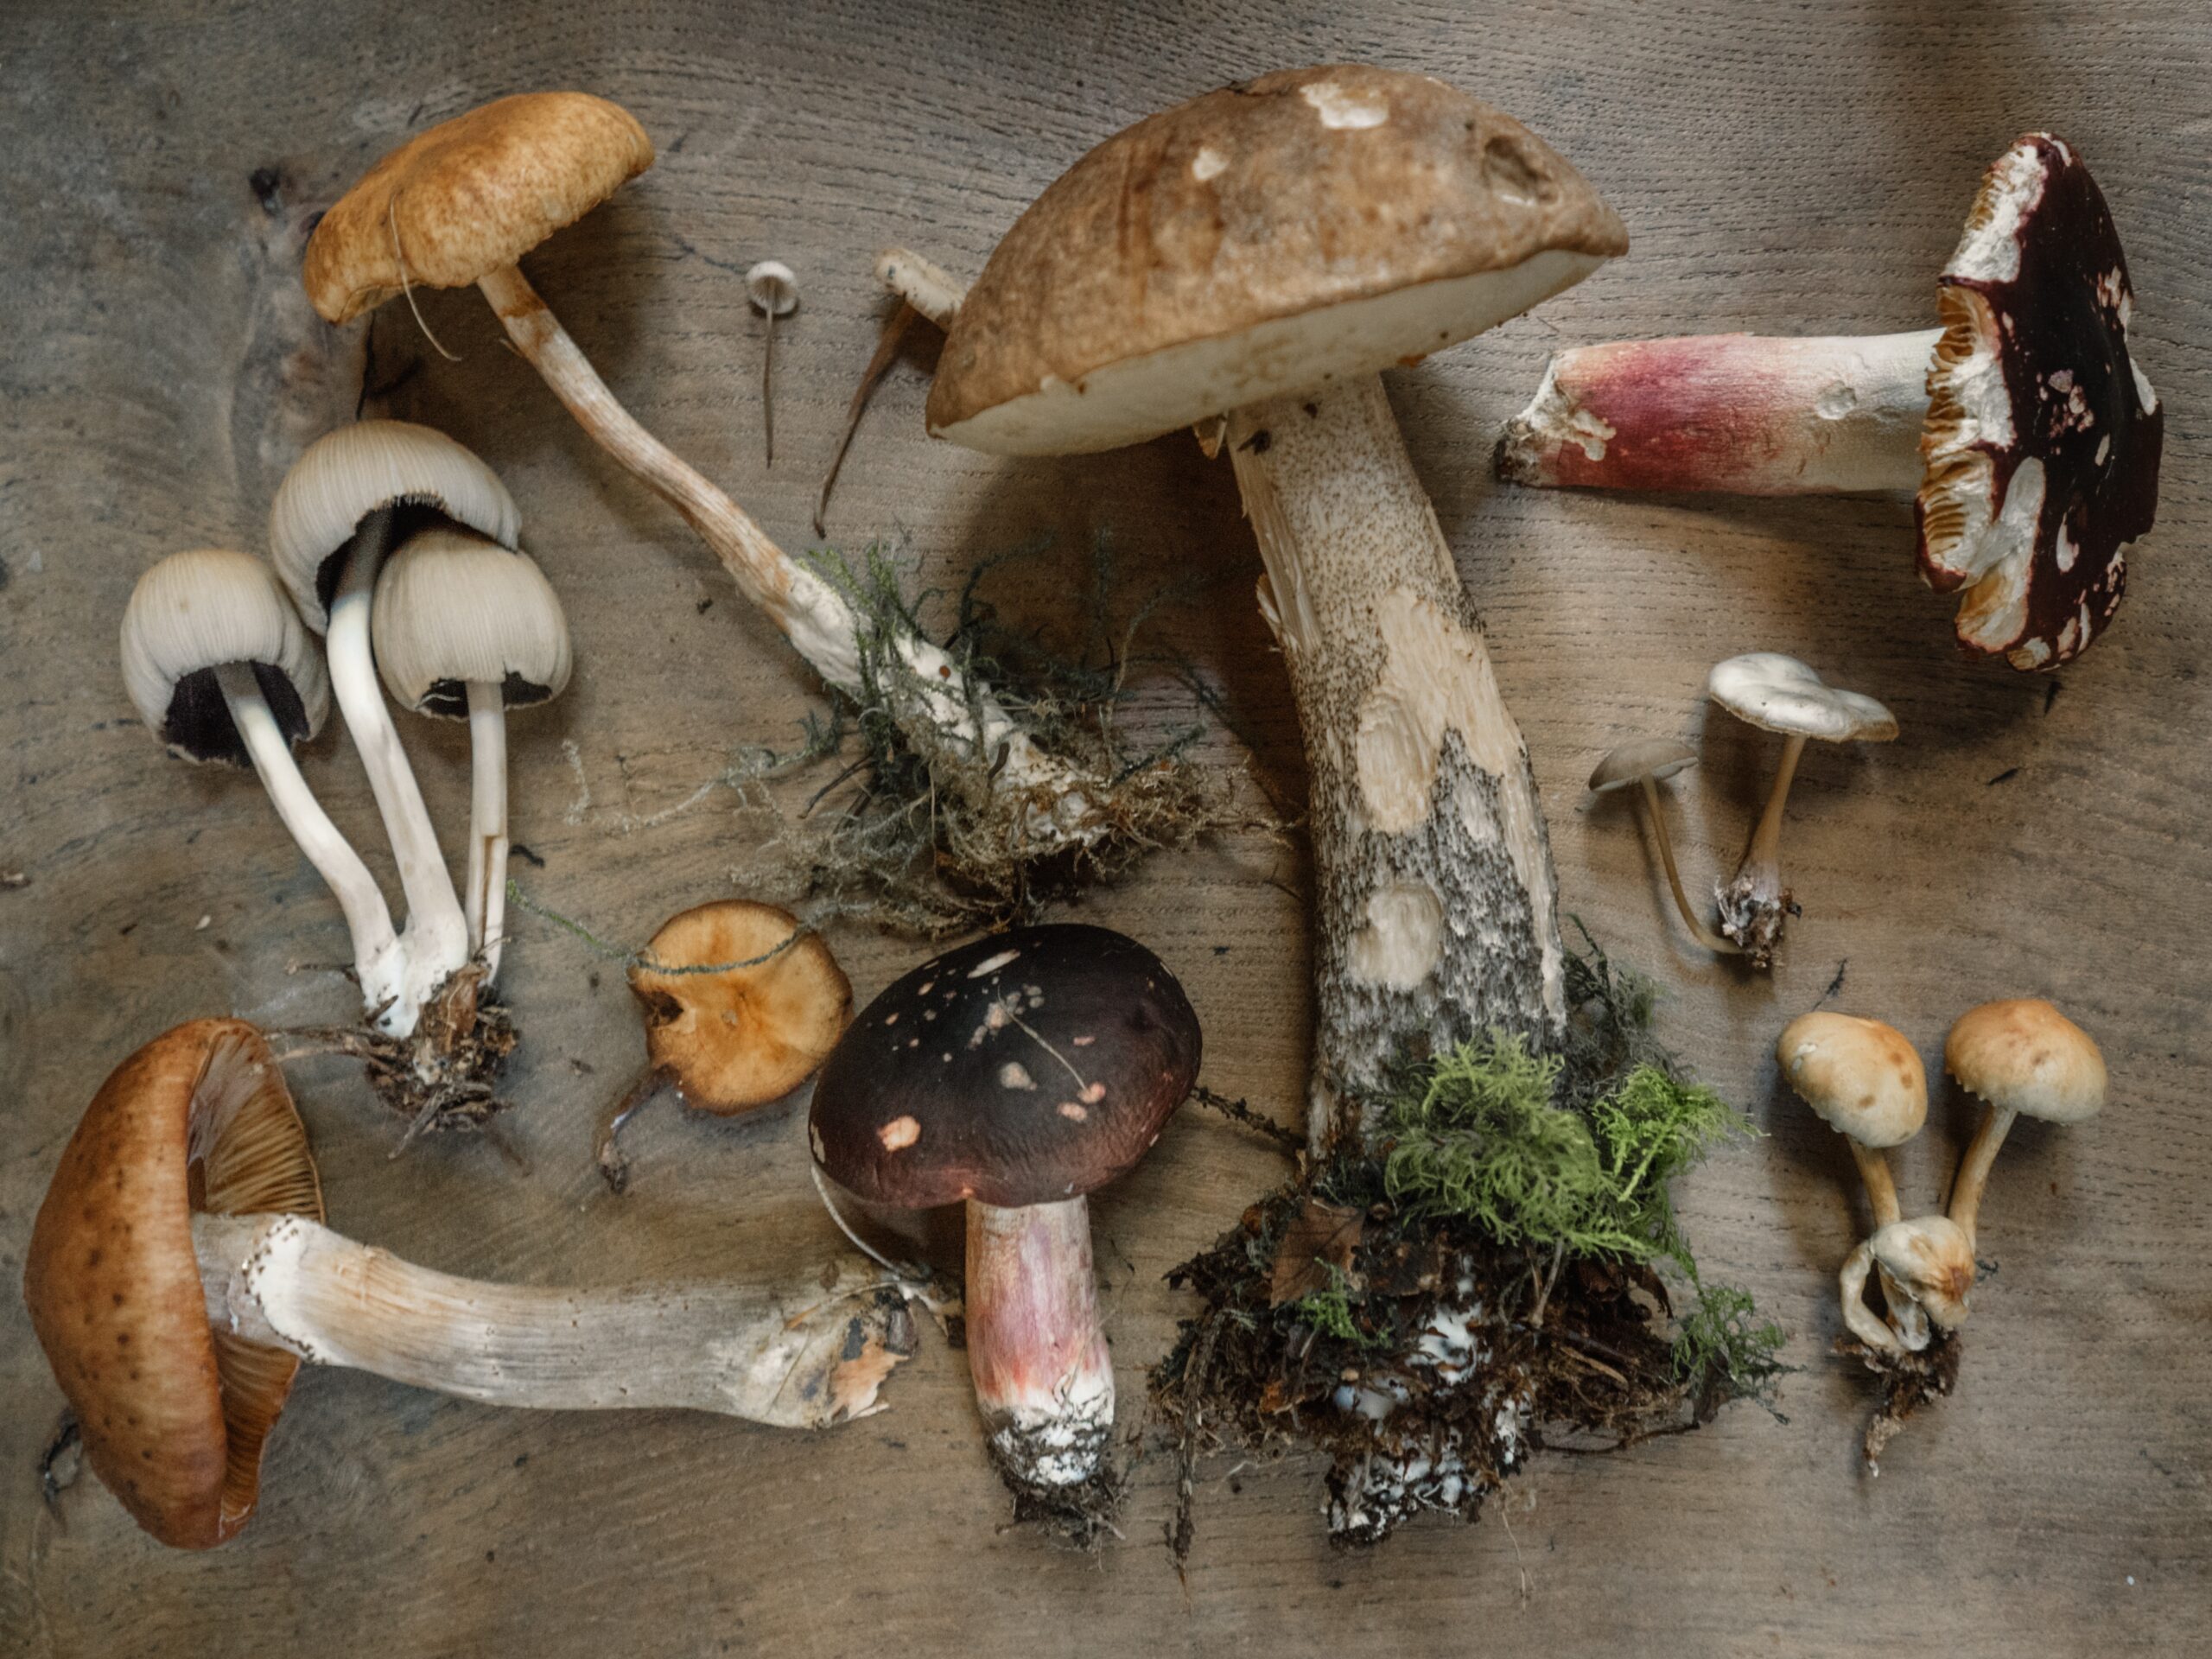 More mushrooms means less cancer